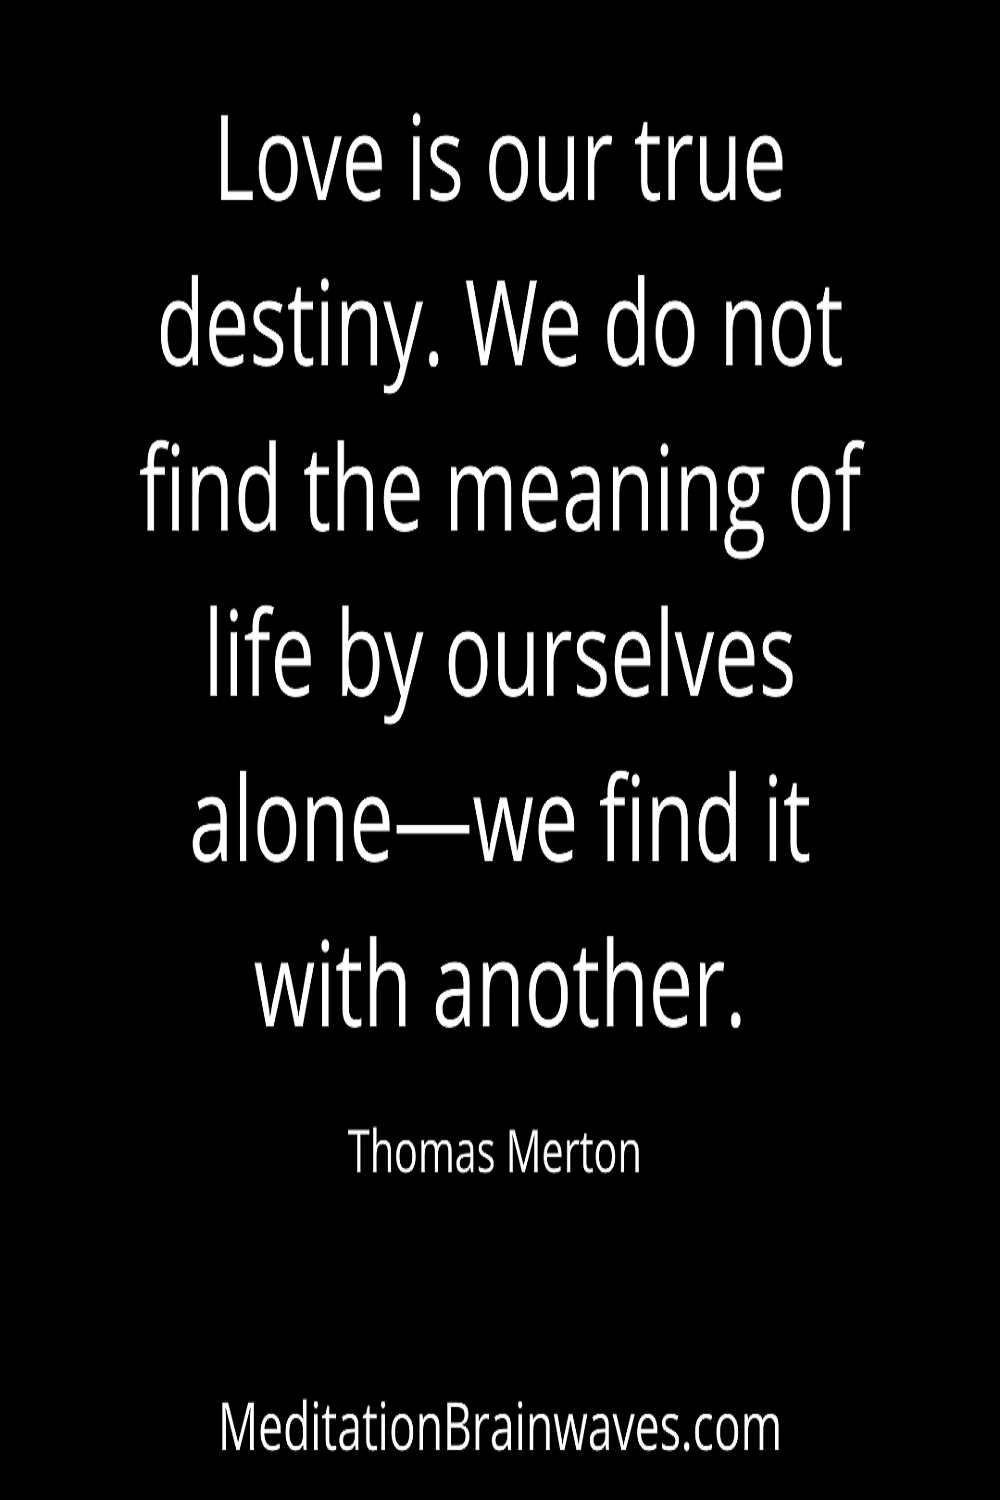 Love is our true destiny. We do not find the meaning of life by ourselves alone we find it with another.